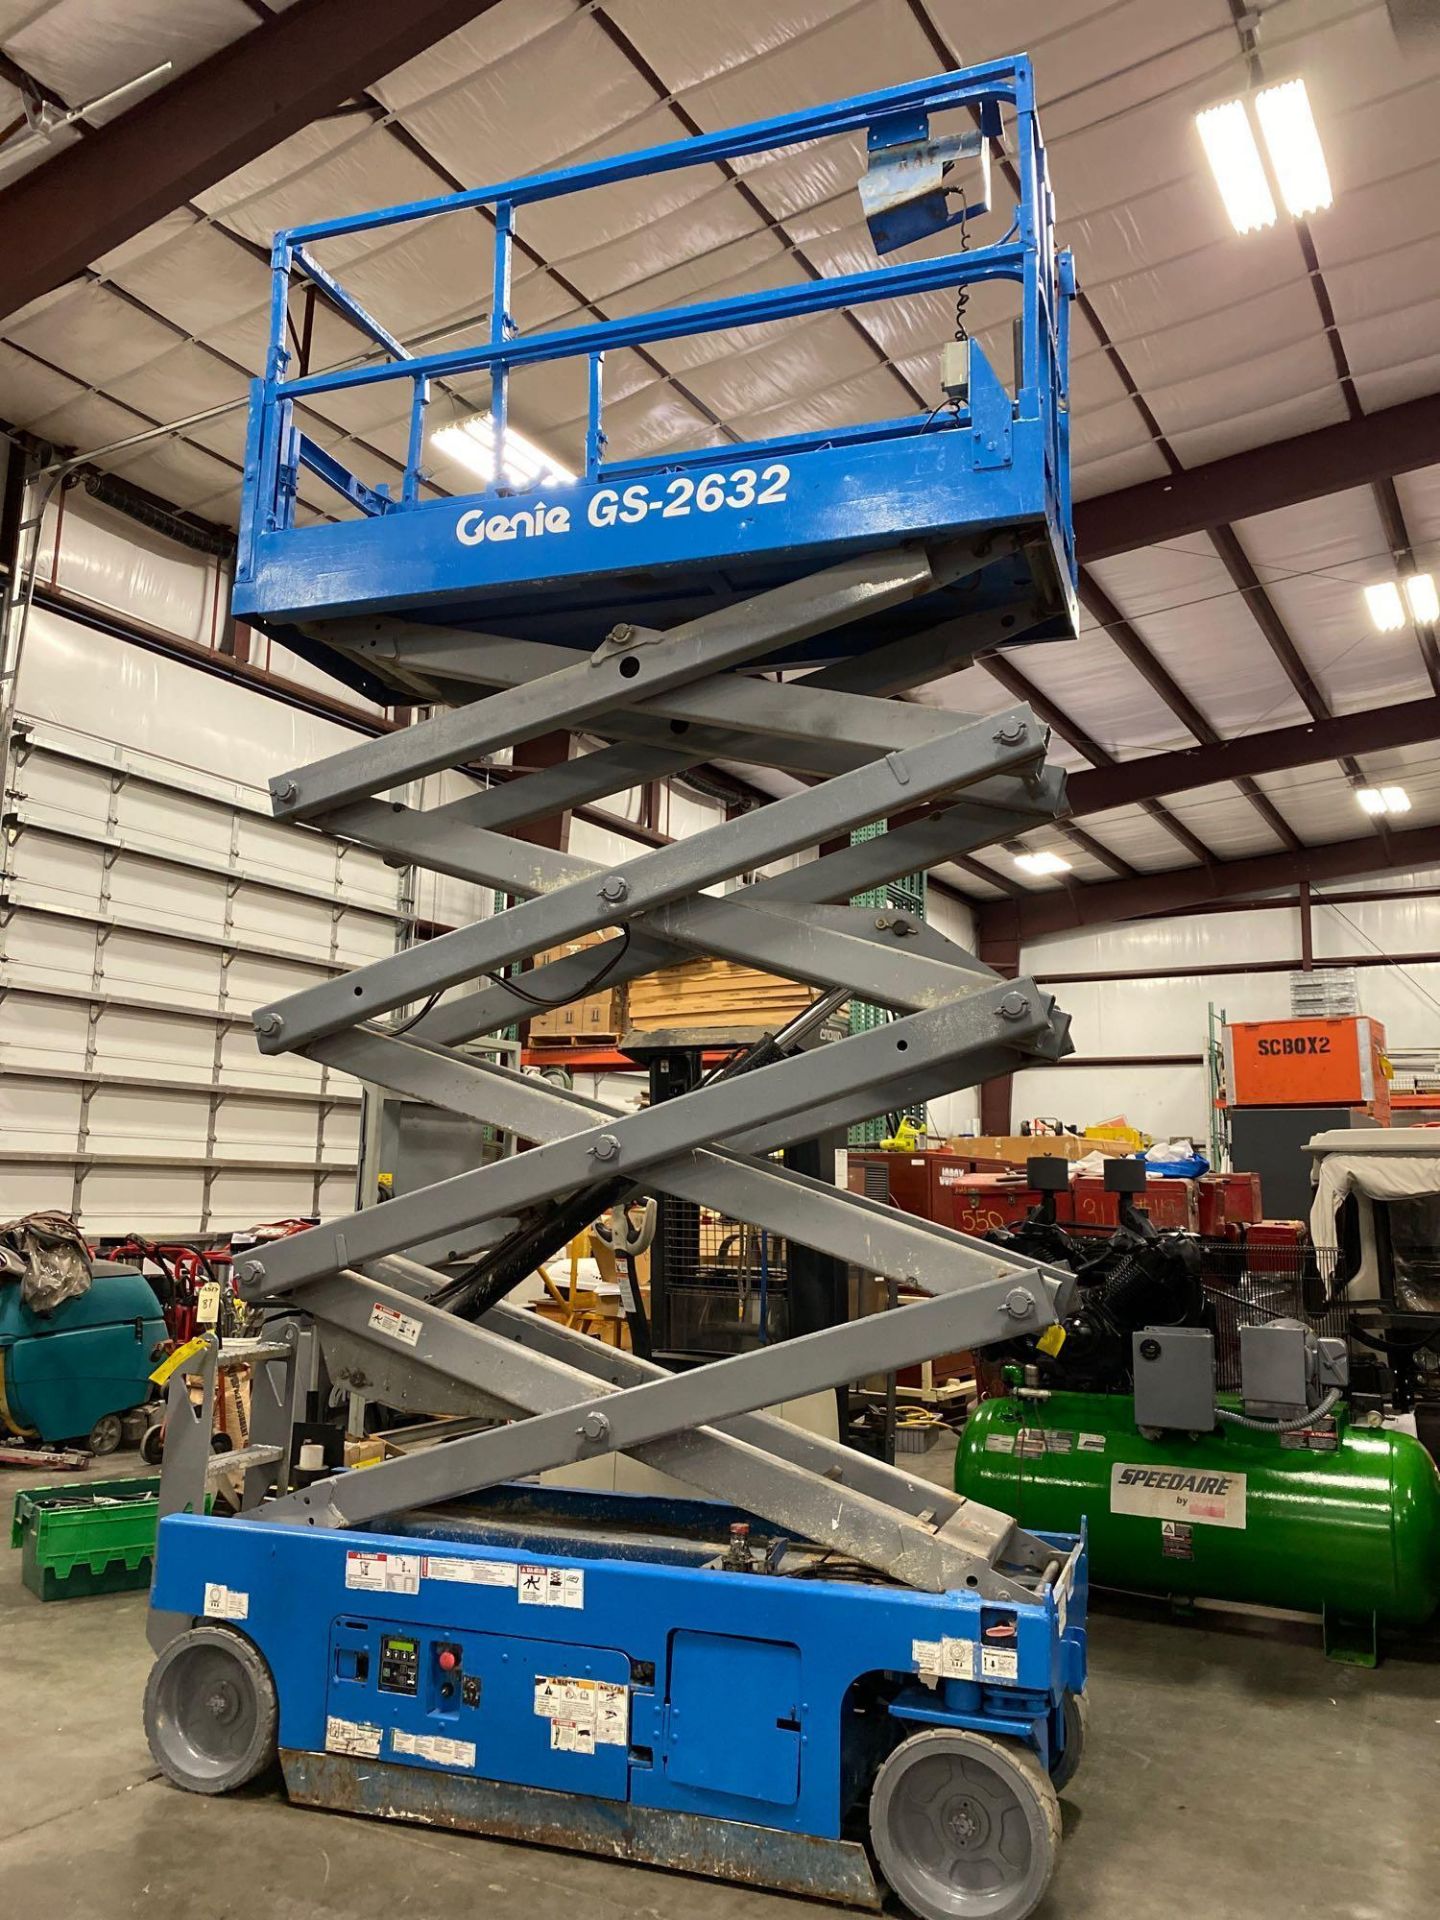 GENIE GS 2632 ELECTRIC SCISSOR LIFT, 26' PLATFORM HEIGHT, BUILT IN BATTERY CHARGER - Image 2 of 12